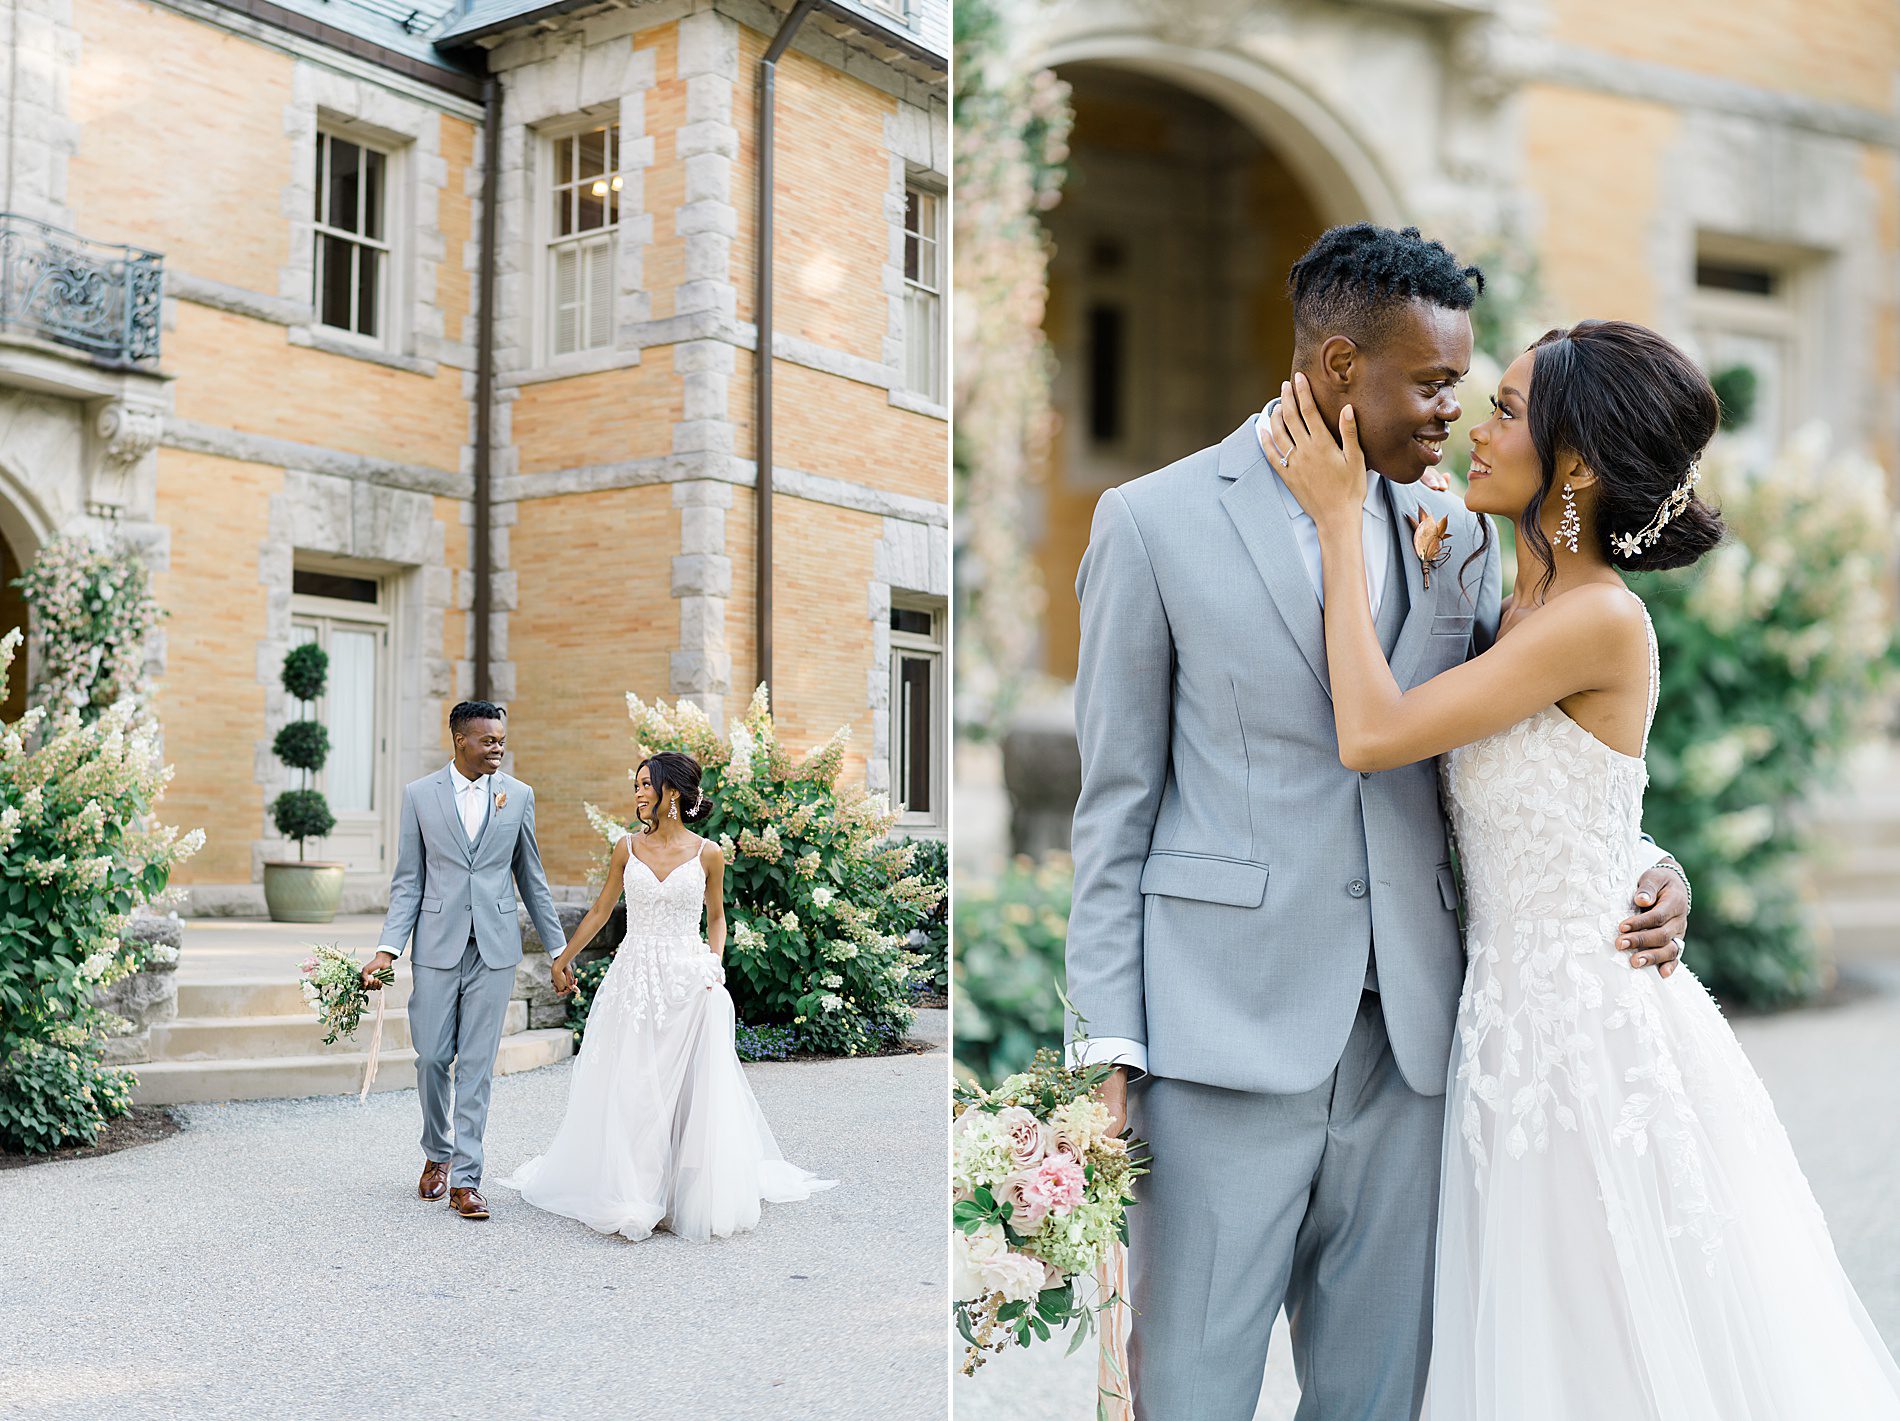 wedding portraits at Styled shoot in PA at Cairnwood Estate